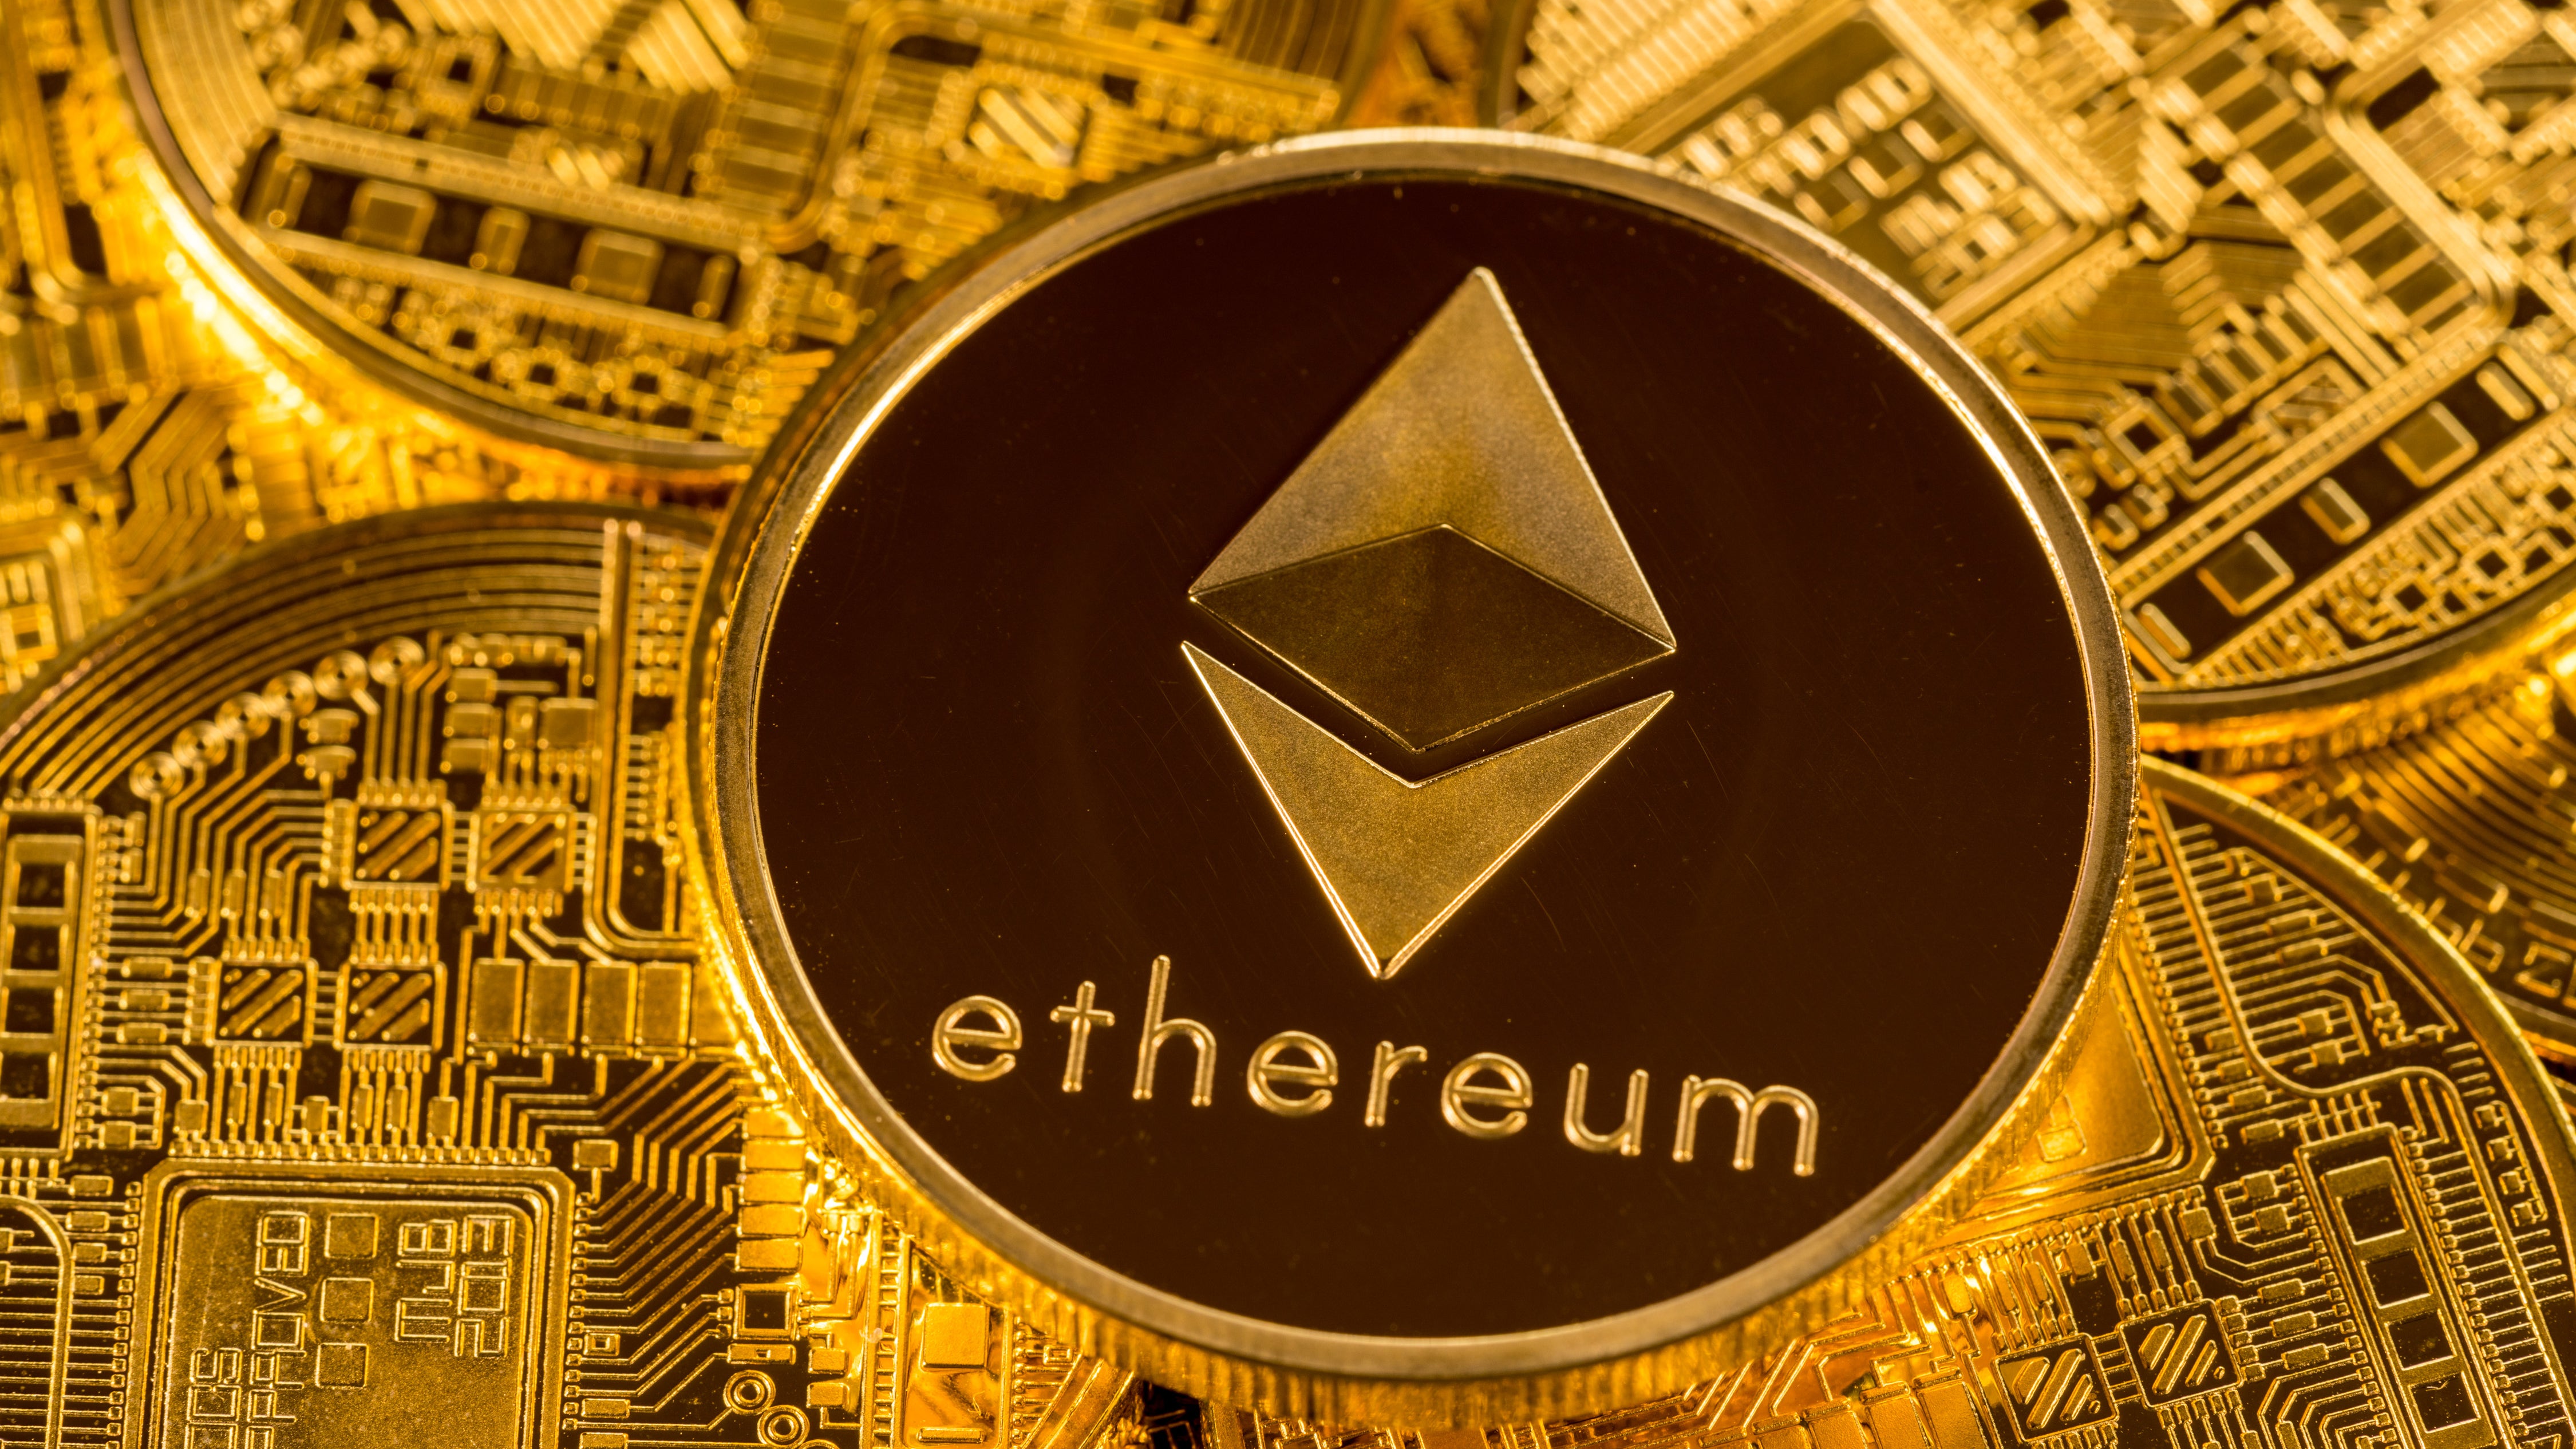 SEC seeks to classify ether as a security - report (Cryptocurrency:ETH-USD)